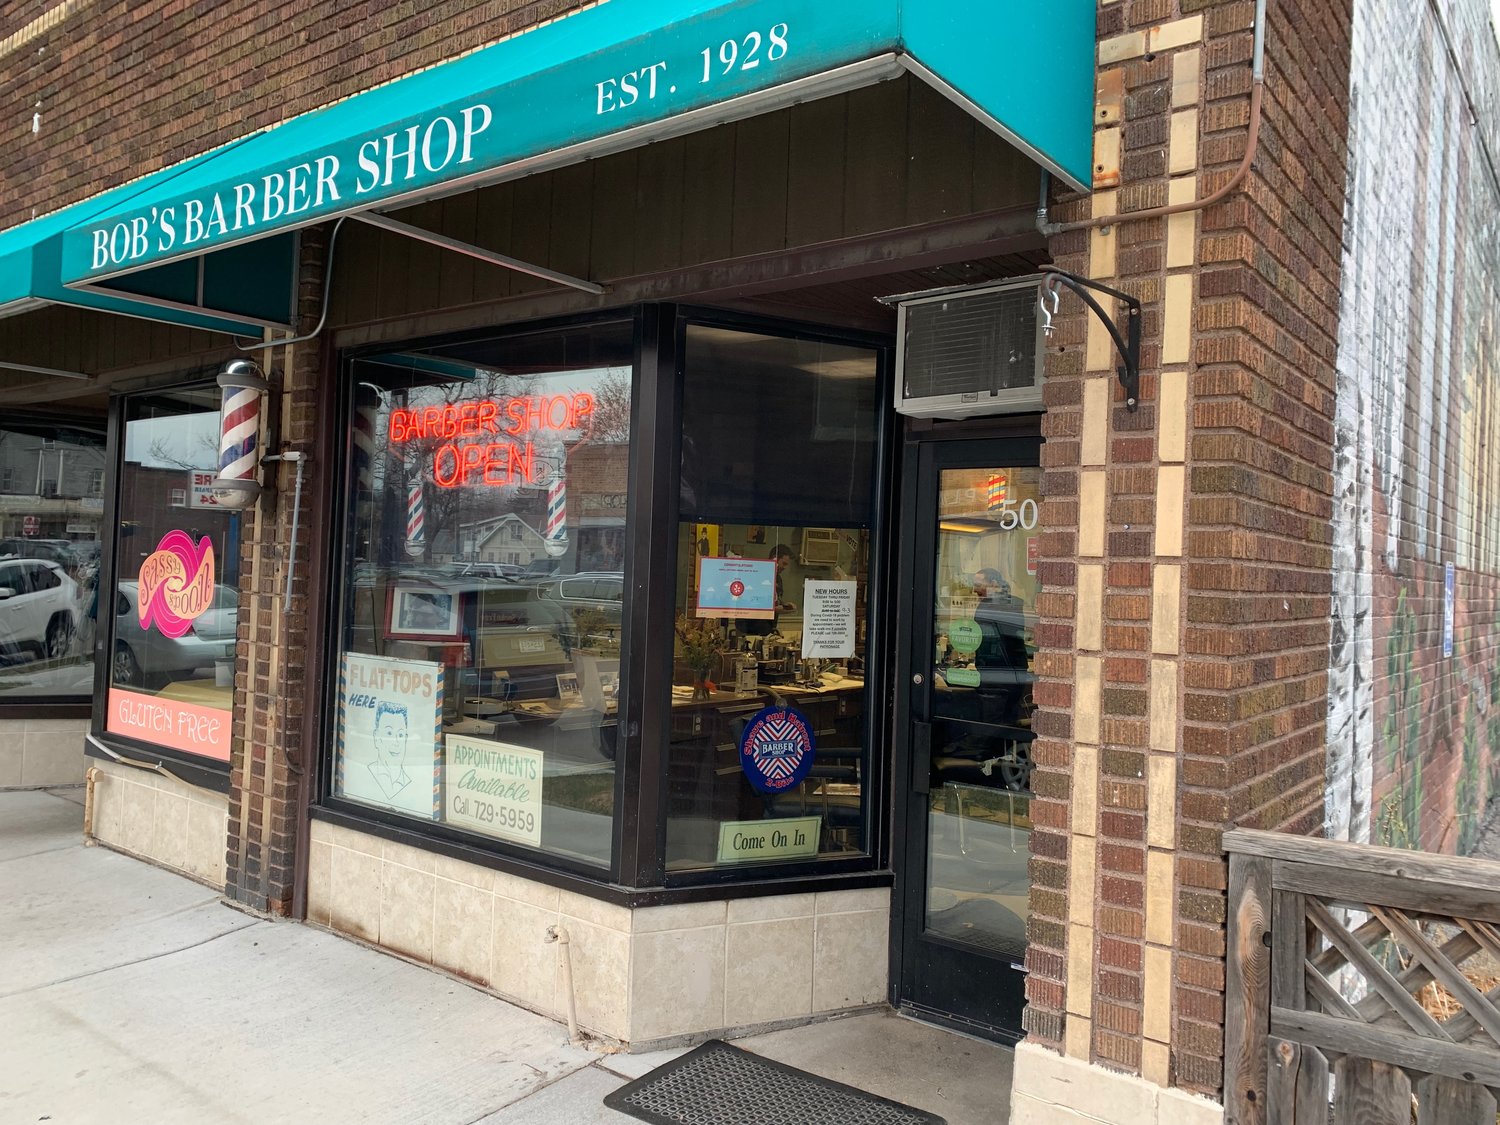 The front entrance of Bob’s Barber Shop on 34th Avenue and 50th Street.